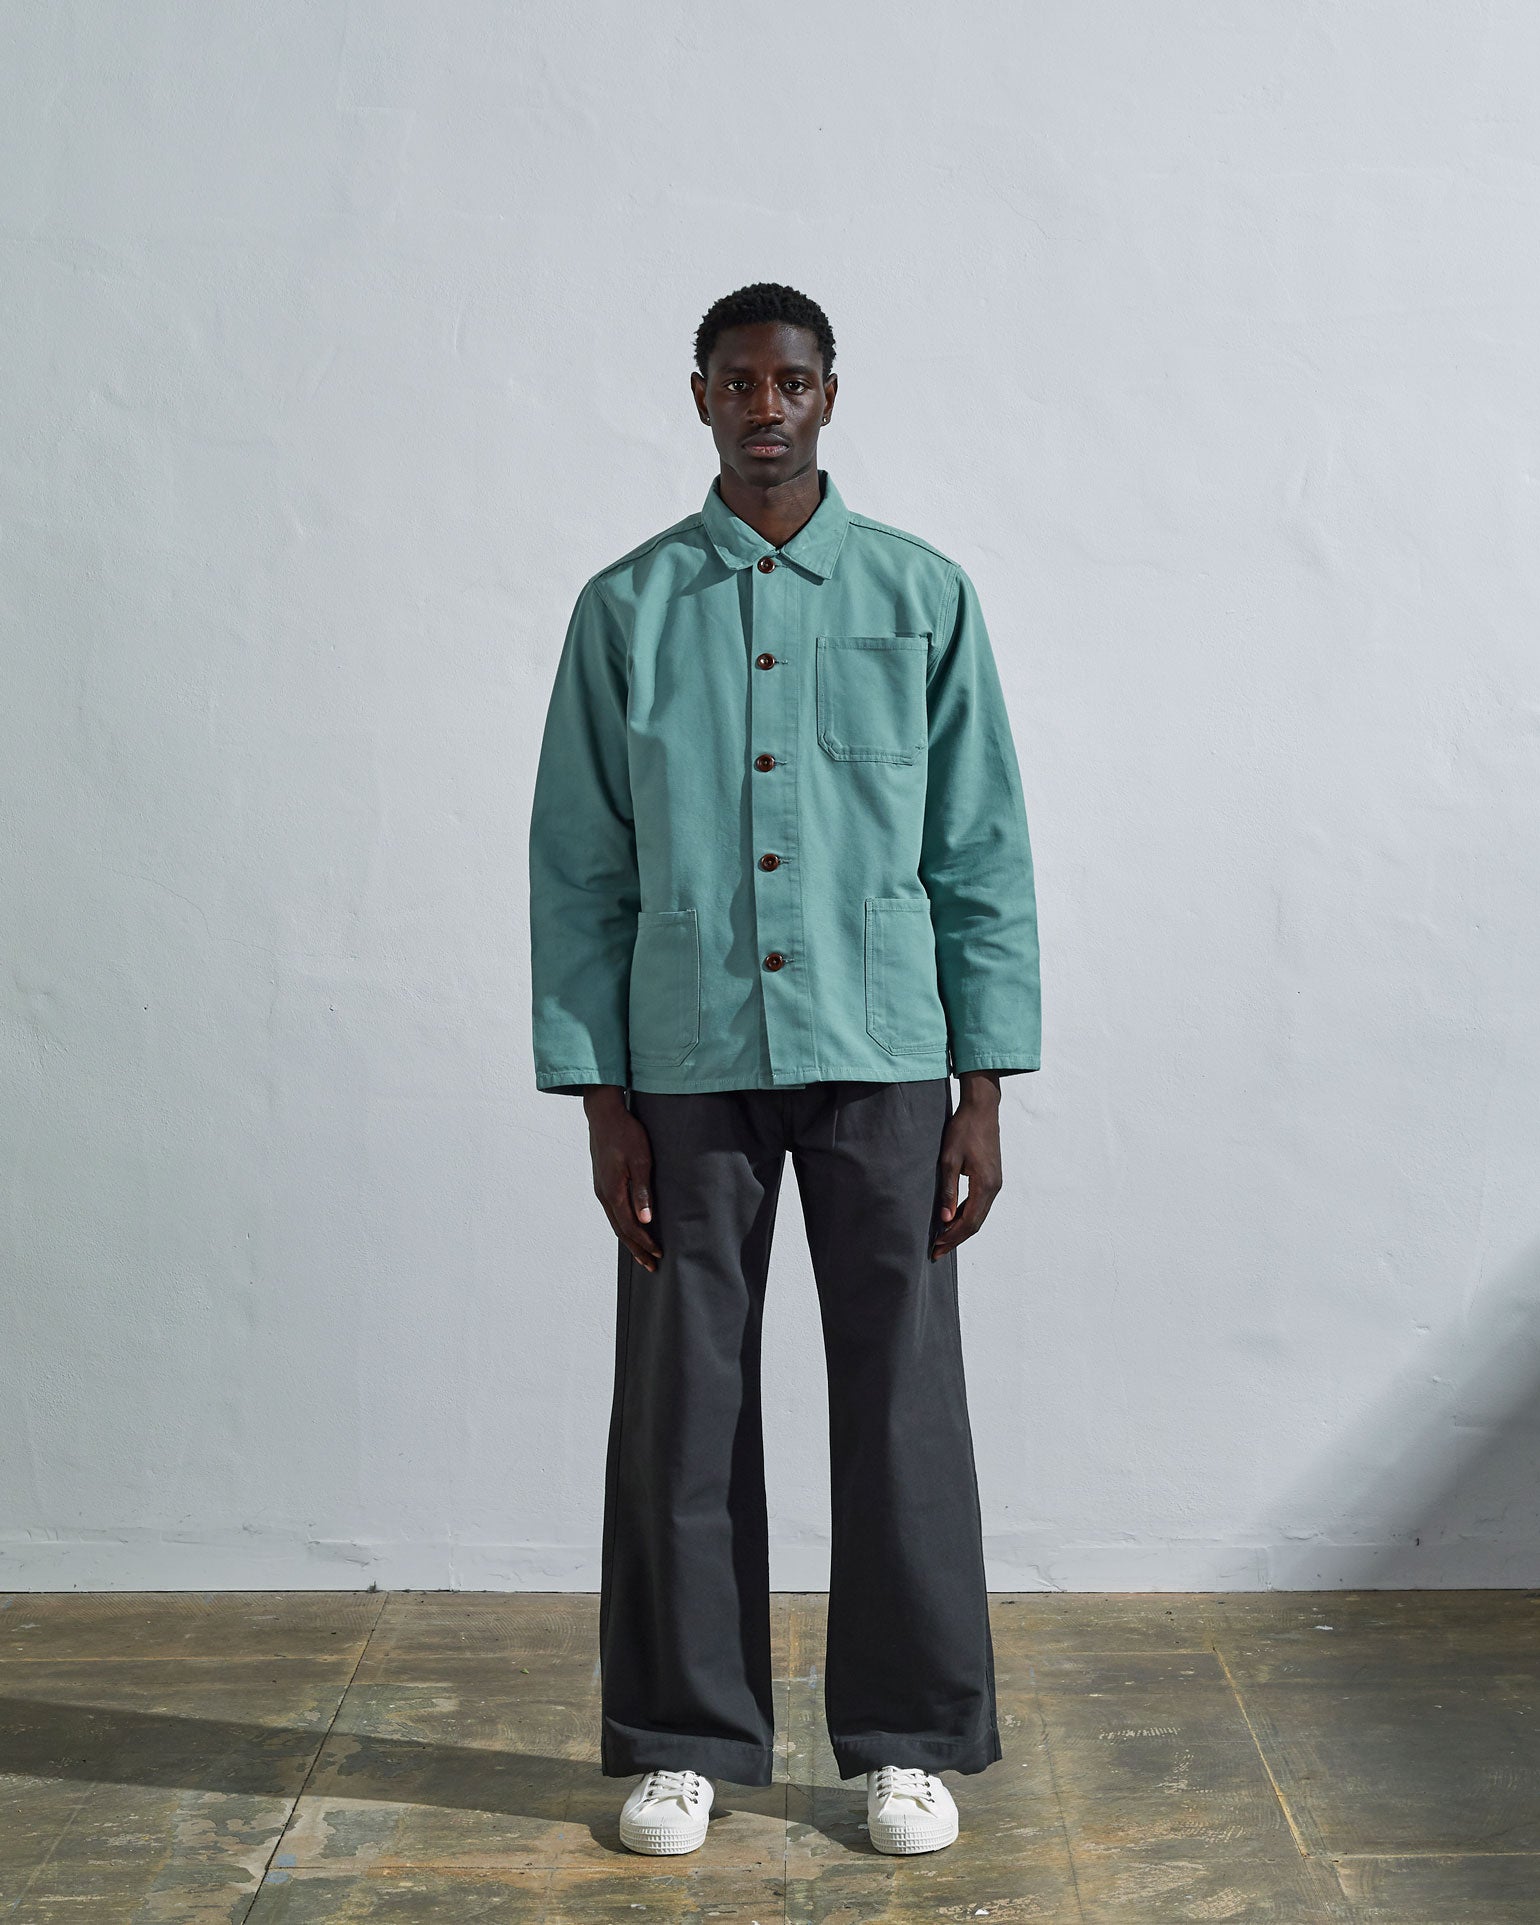 Full-length front view of model wearing #3001, blue-green 'eucalyptus' organic cotton overshirt paired with dark pants.